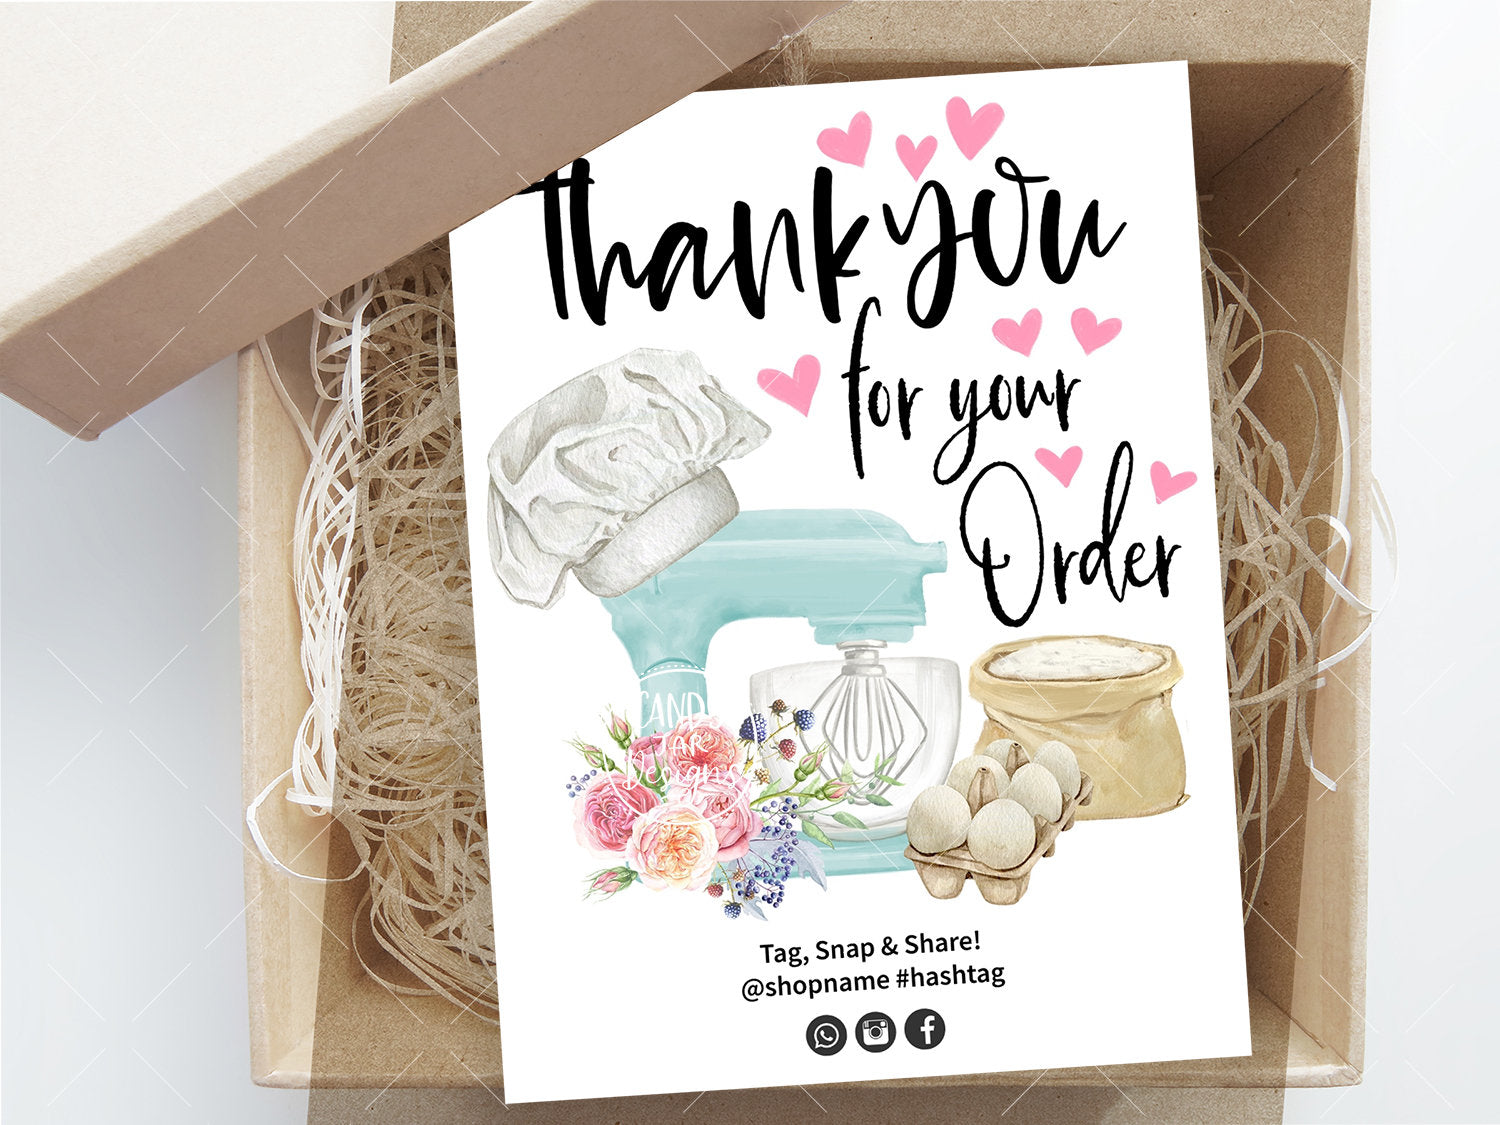 Baking Thank You For Order Insert Card, Kitchen Mixer